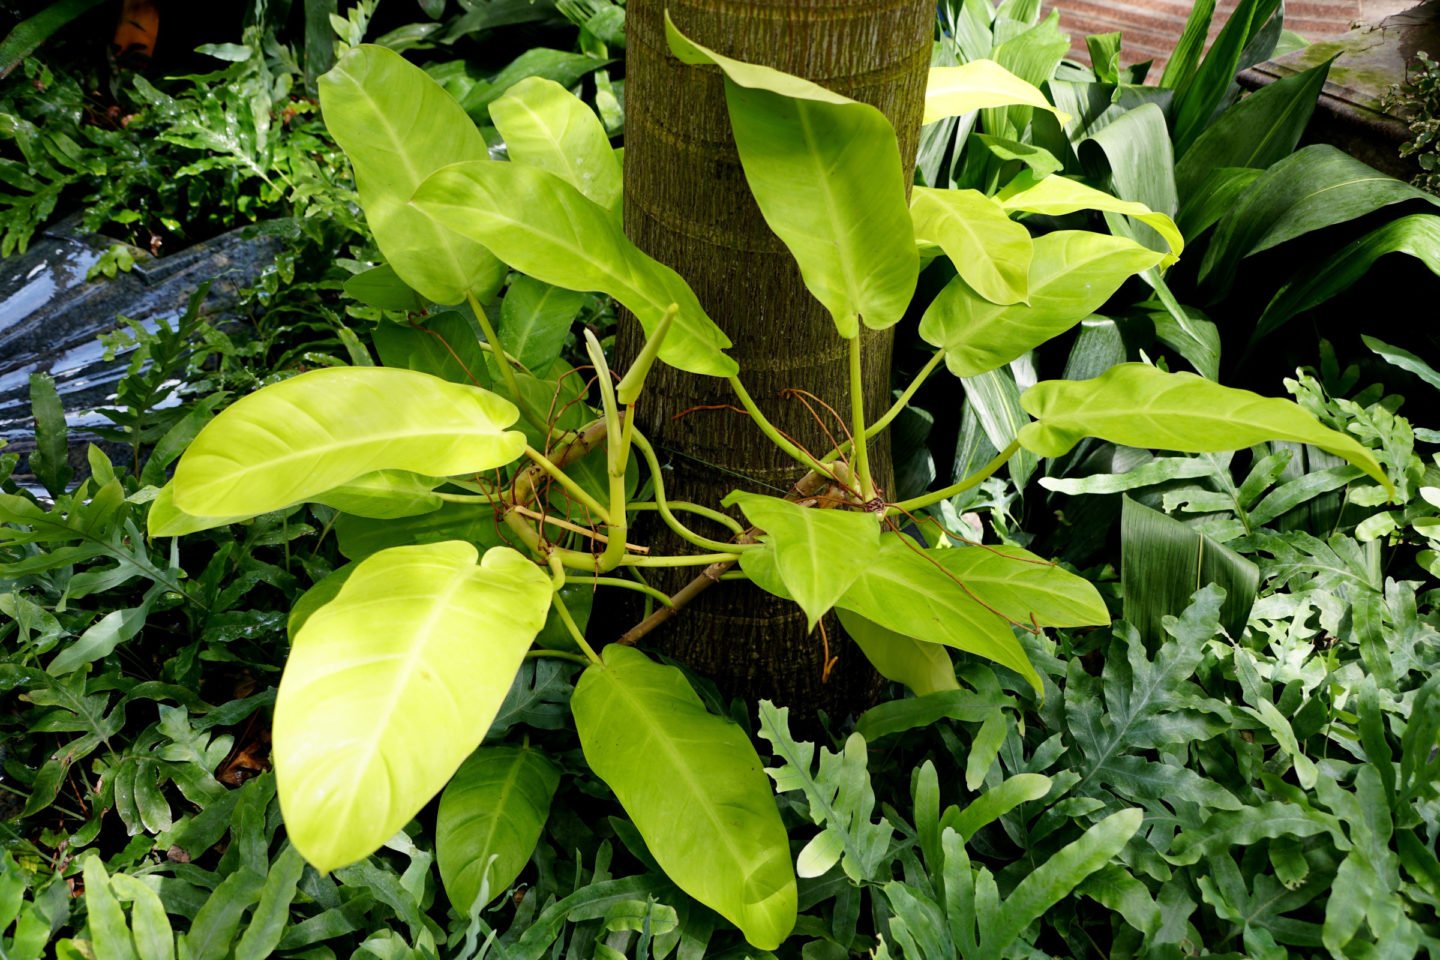 Philodendron Lemon Lime Growing On Trees